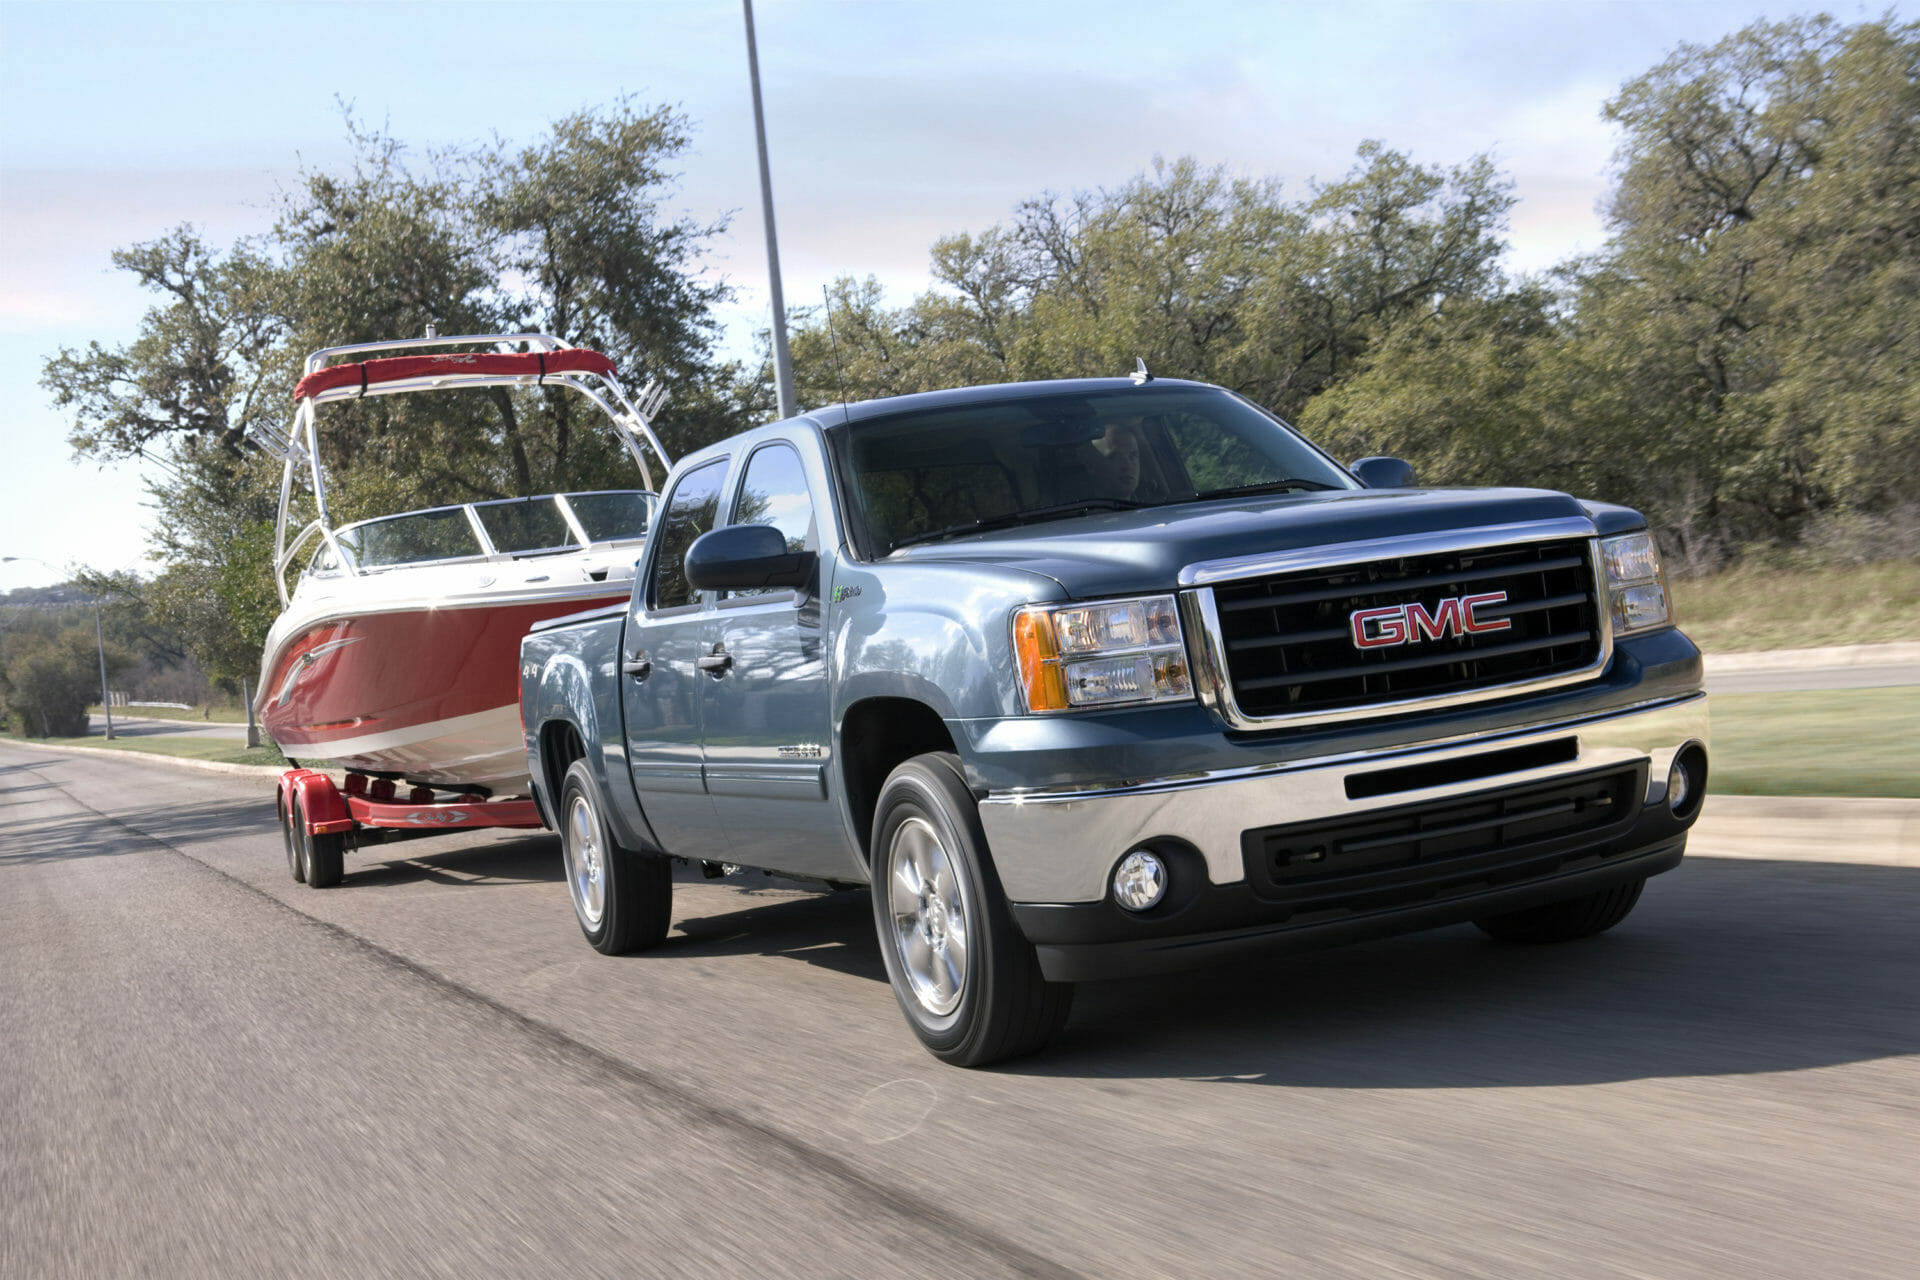 2011 GMC Sierra 1500 Review: A Long-Lasting, Upscale Full-Size Truck